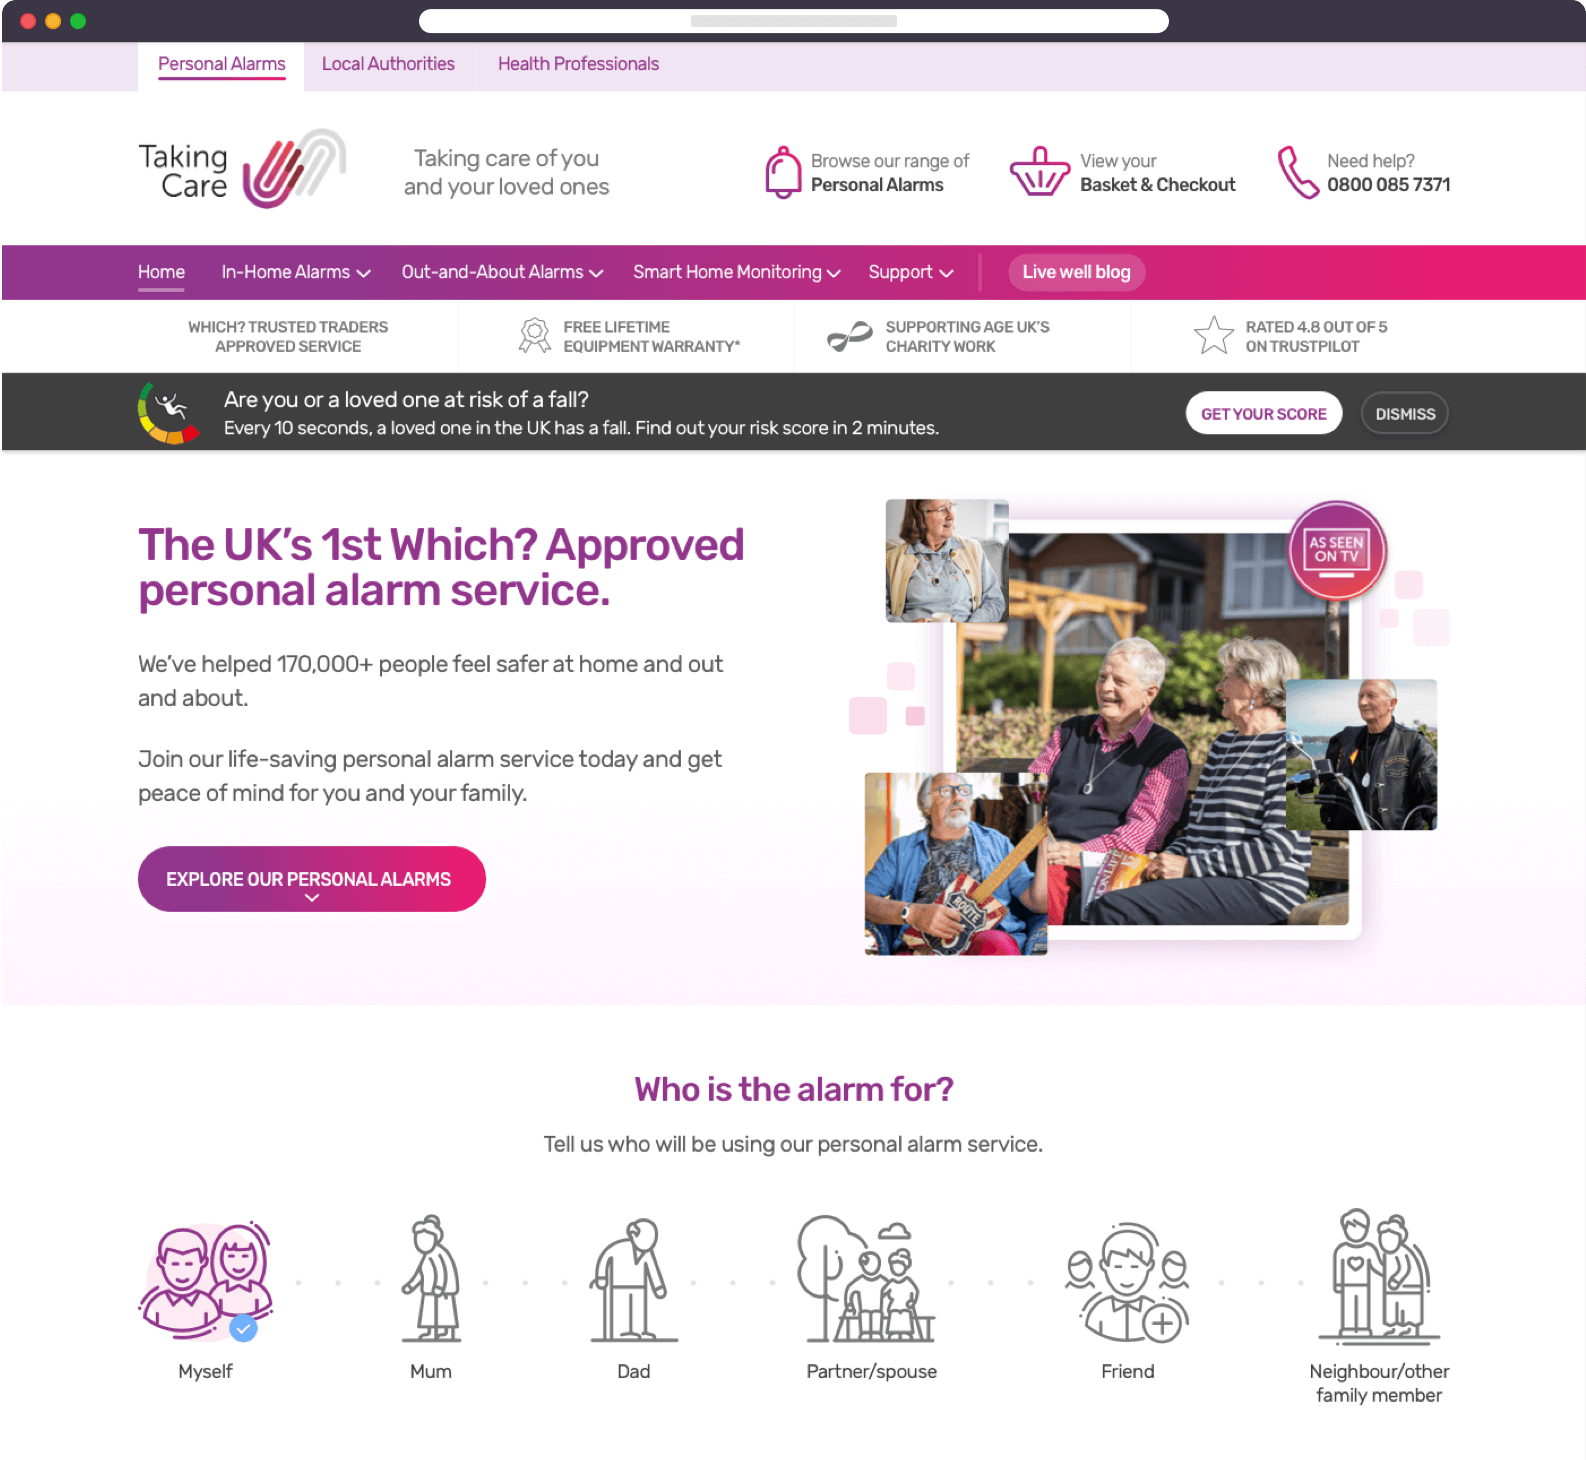 Desktop version of the Taking Care homepage redesigned in 2021.